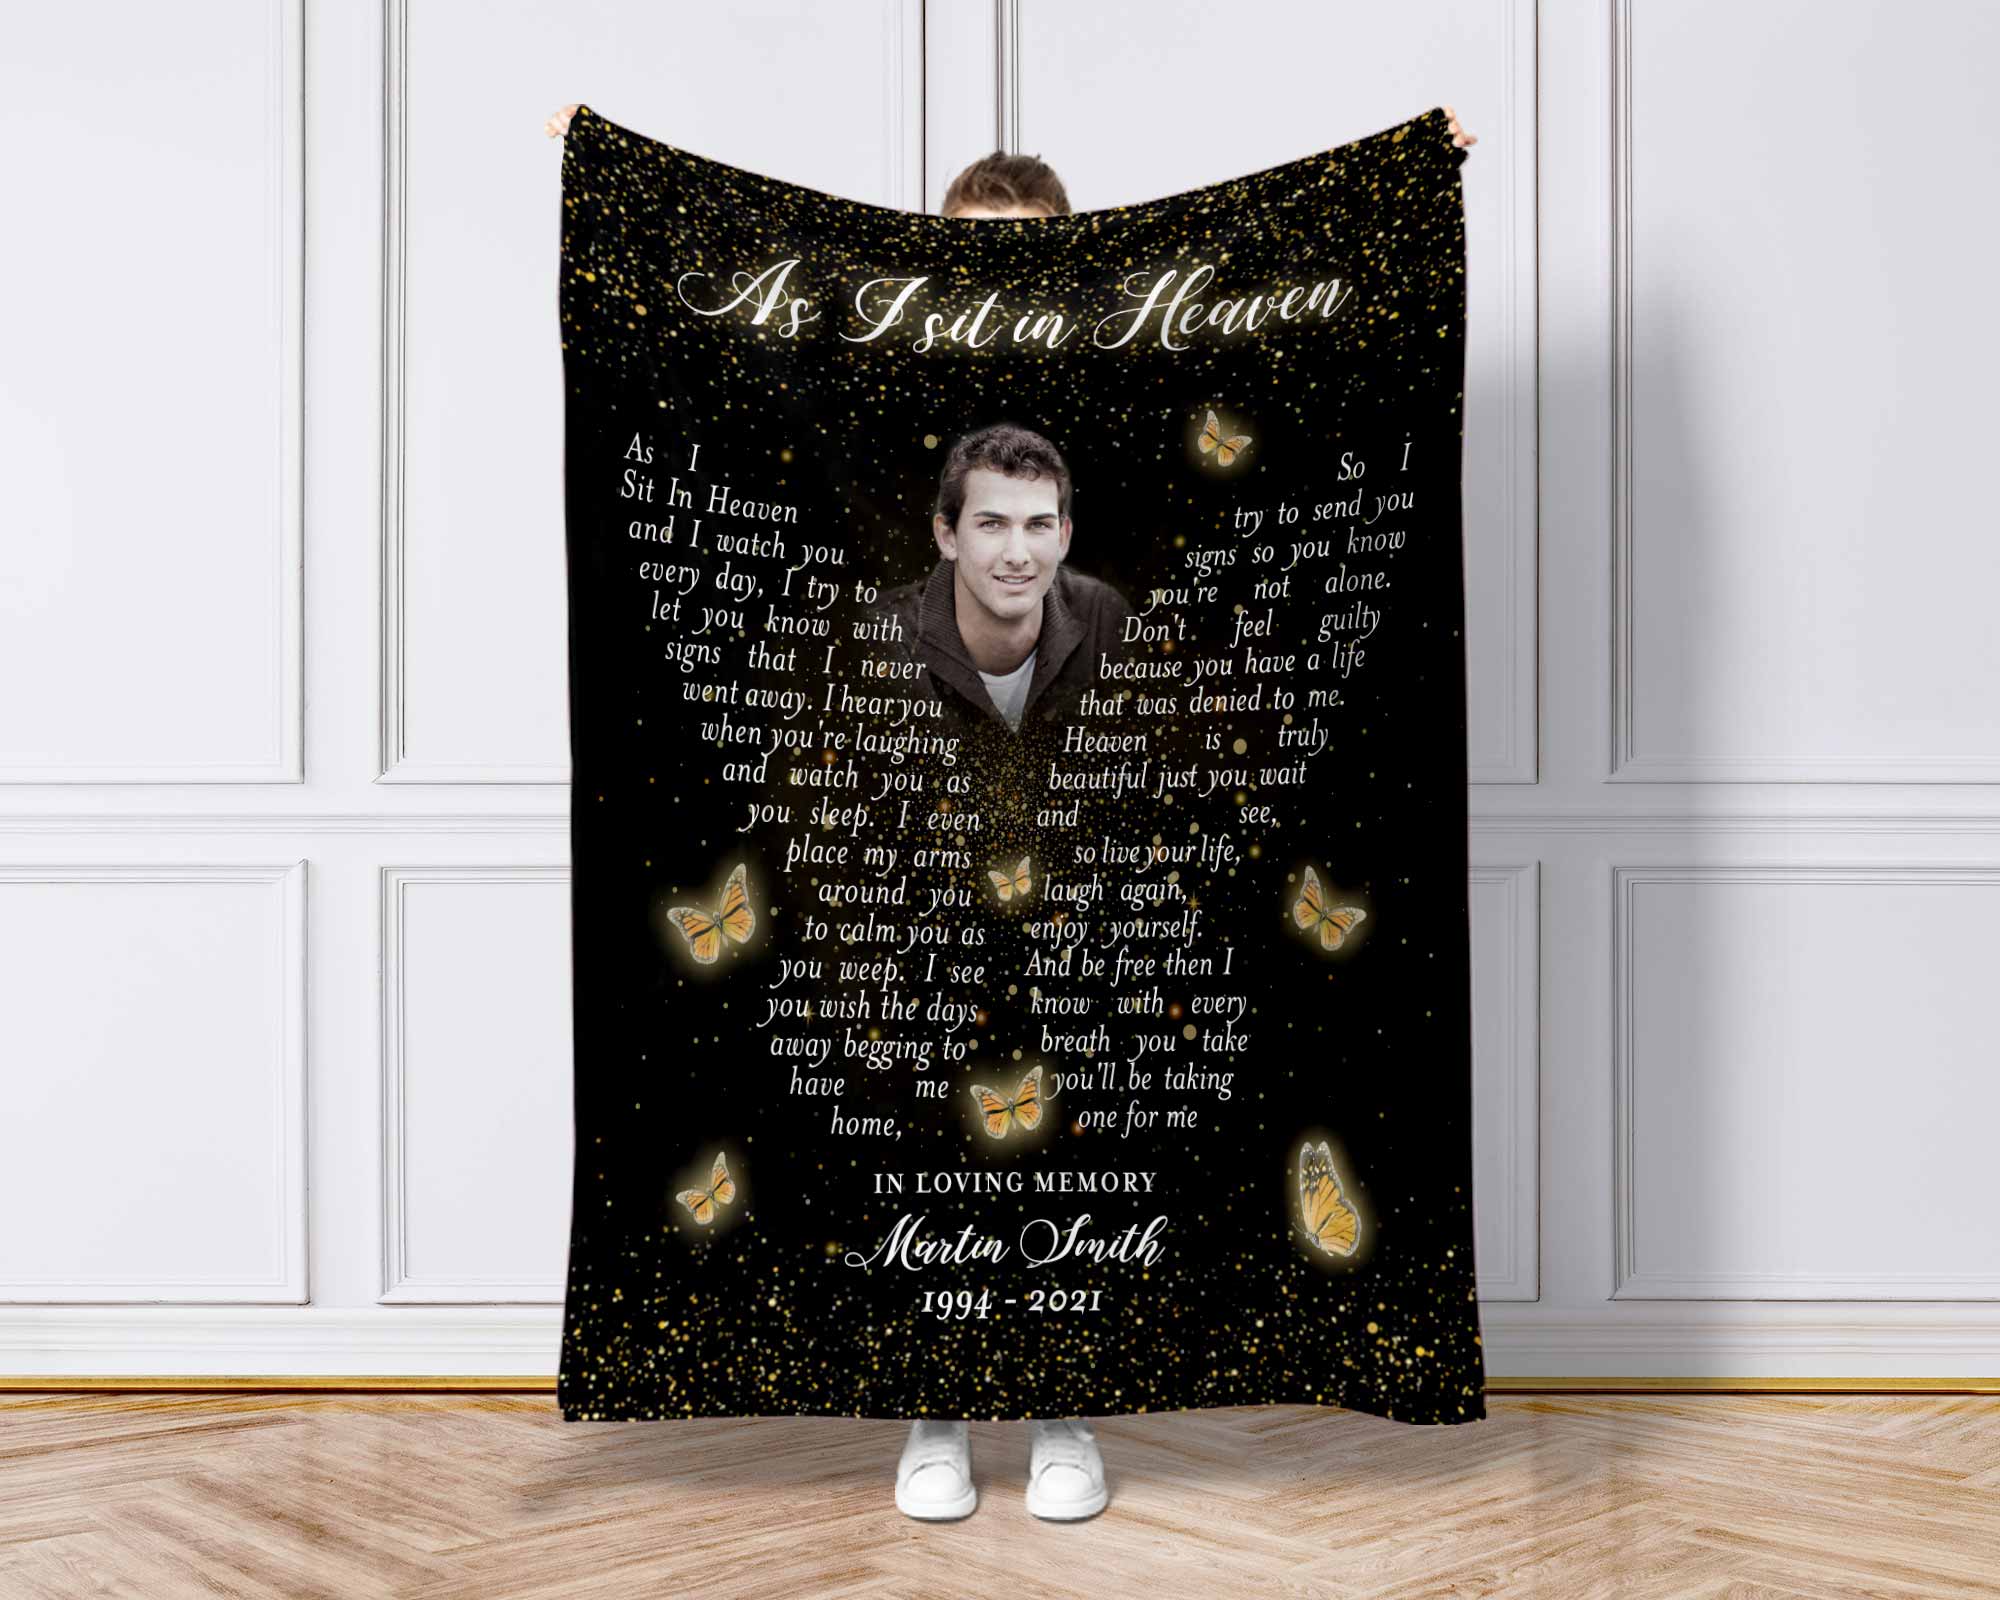 As I Sit In Heaven Remembrance Blanket For Loss Of Son, Fathers Day Gift, Sympathy Blanket For Funeral